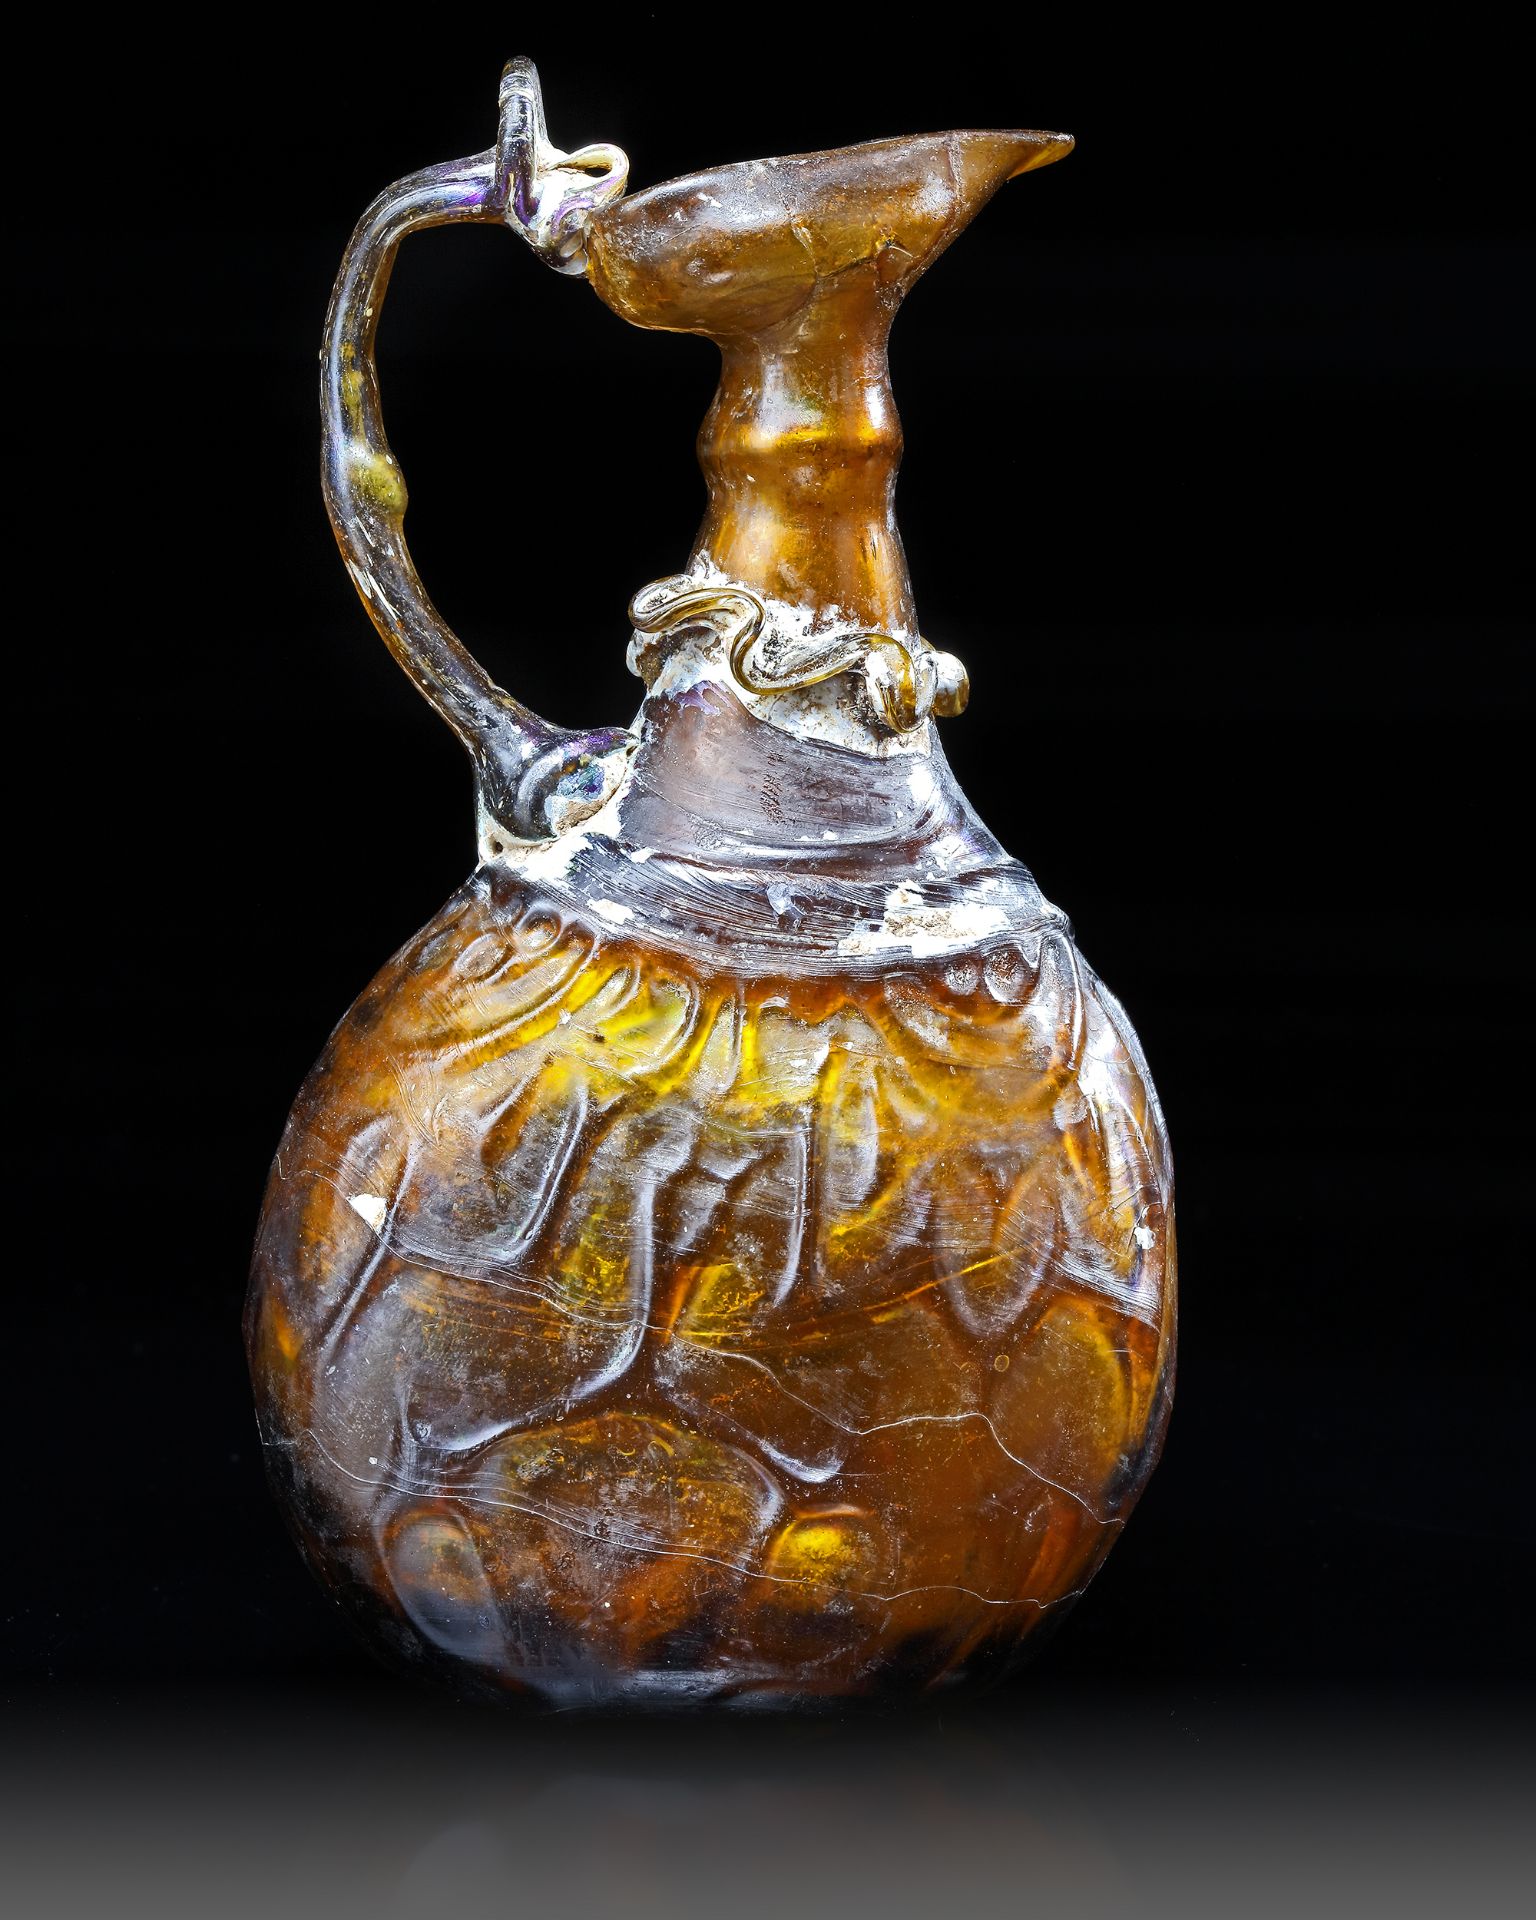 AN AMBER GLASS JUG, PERSIA, 10TH-11TH CENTURY - Image 2 of 5